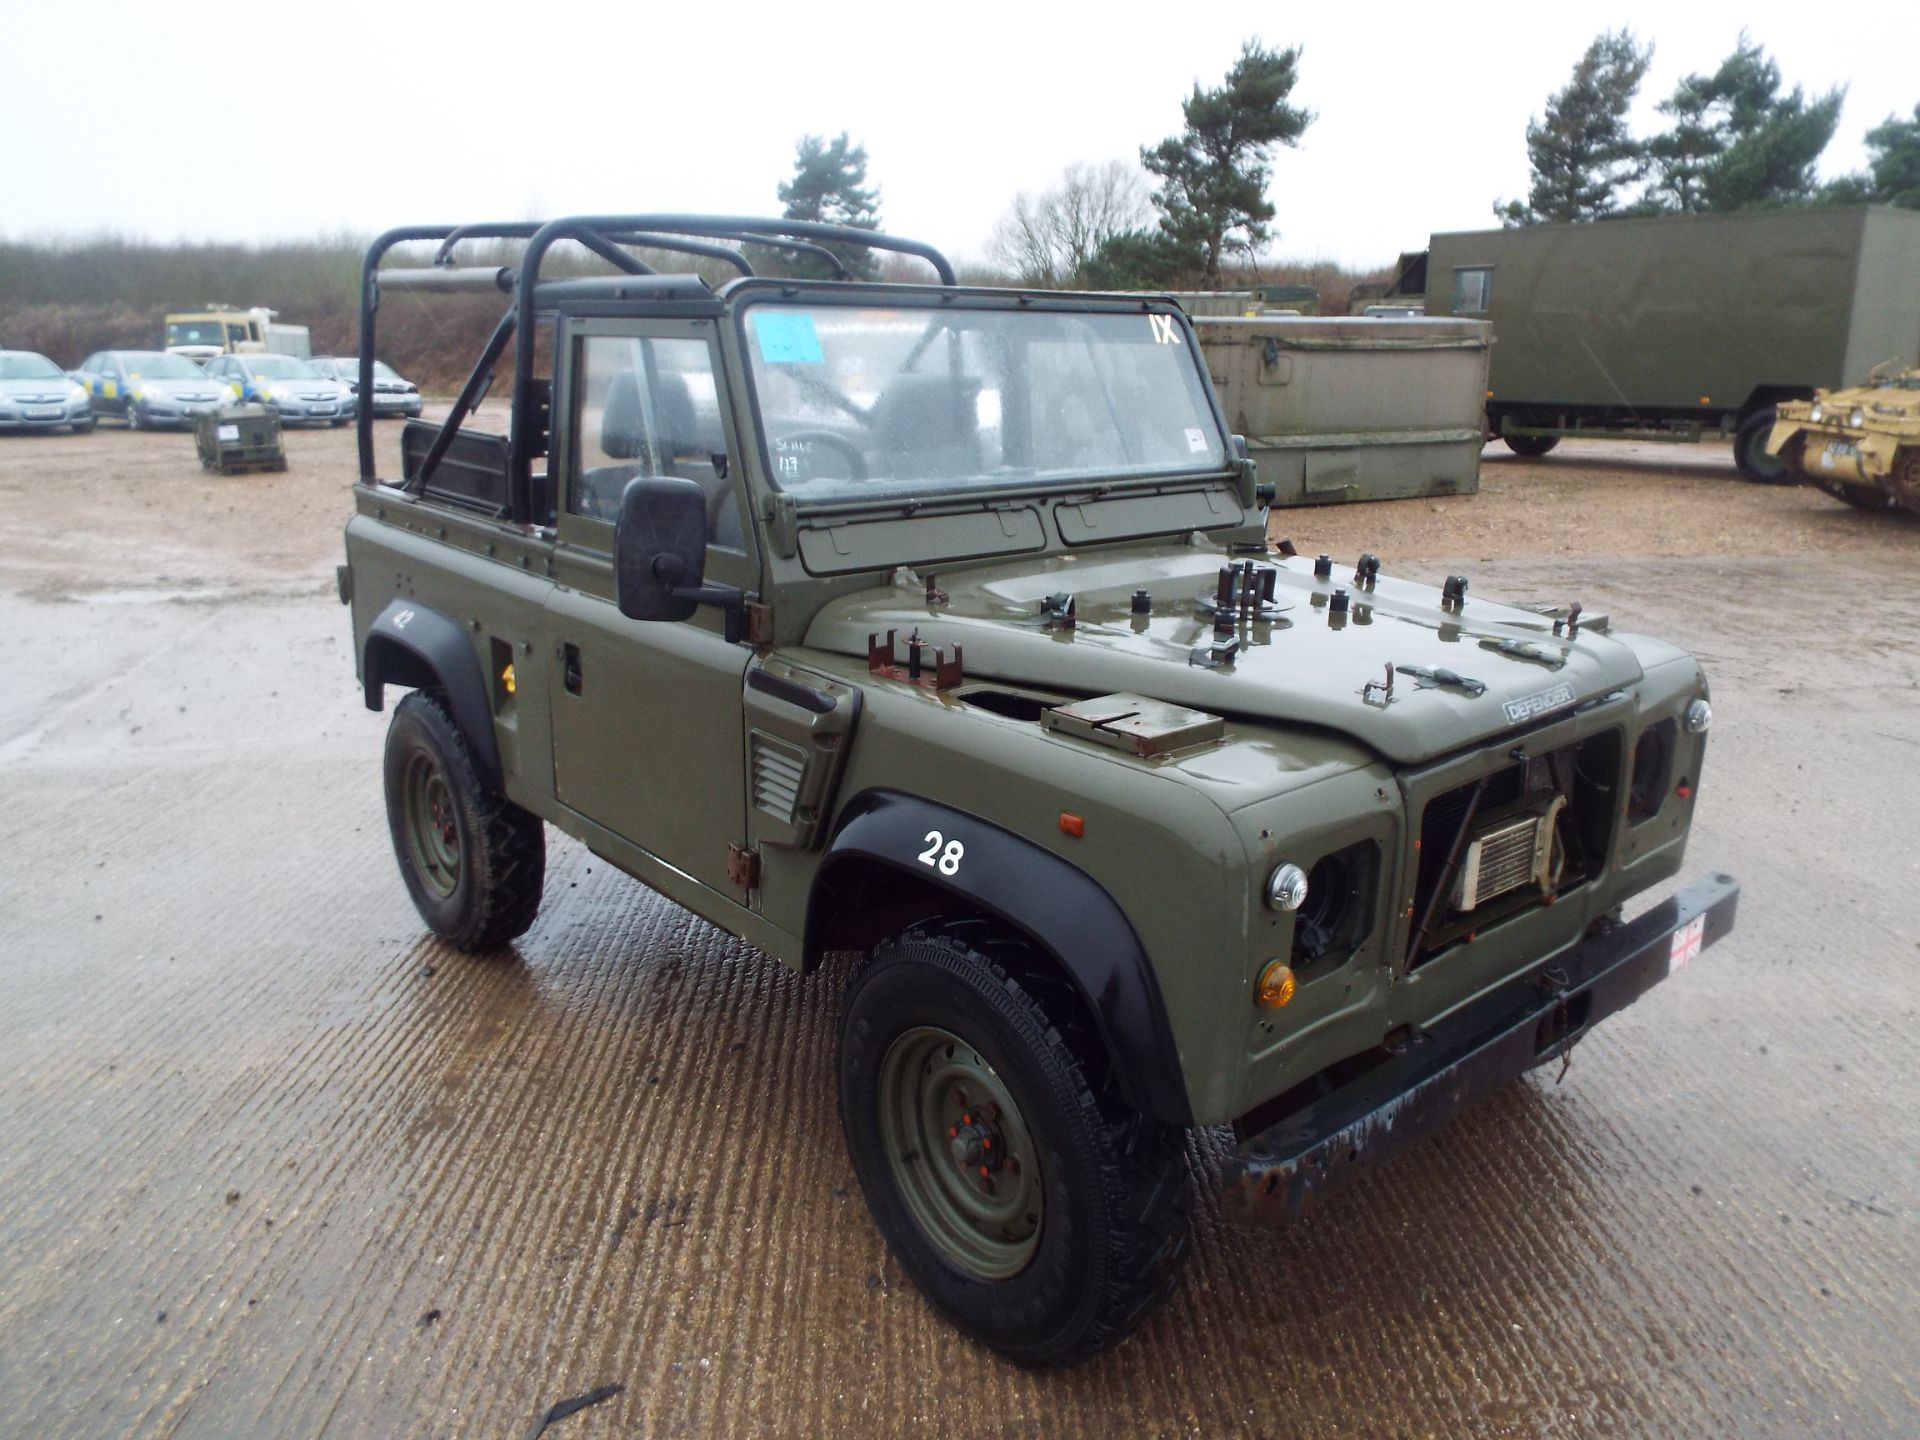 Military Specification Land Rover Wolf 90 Soft Top - Image 24 of 24